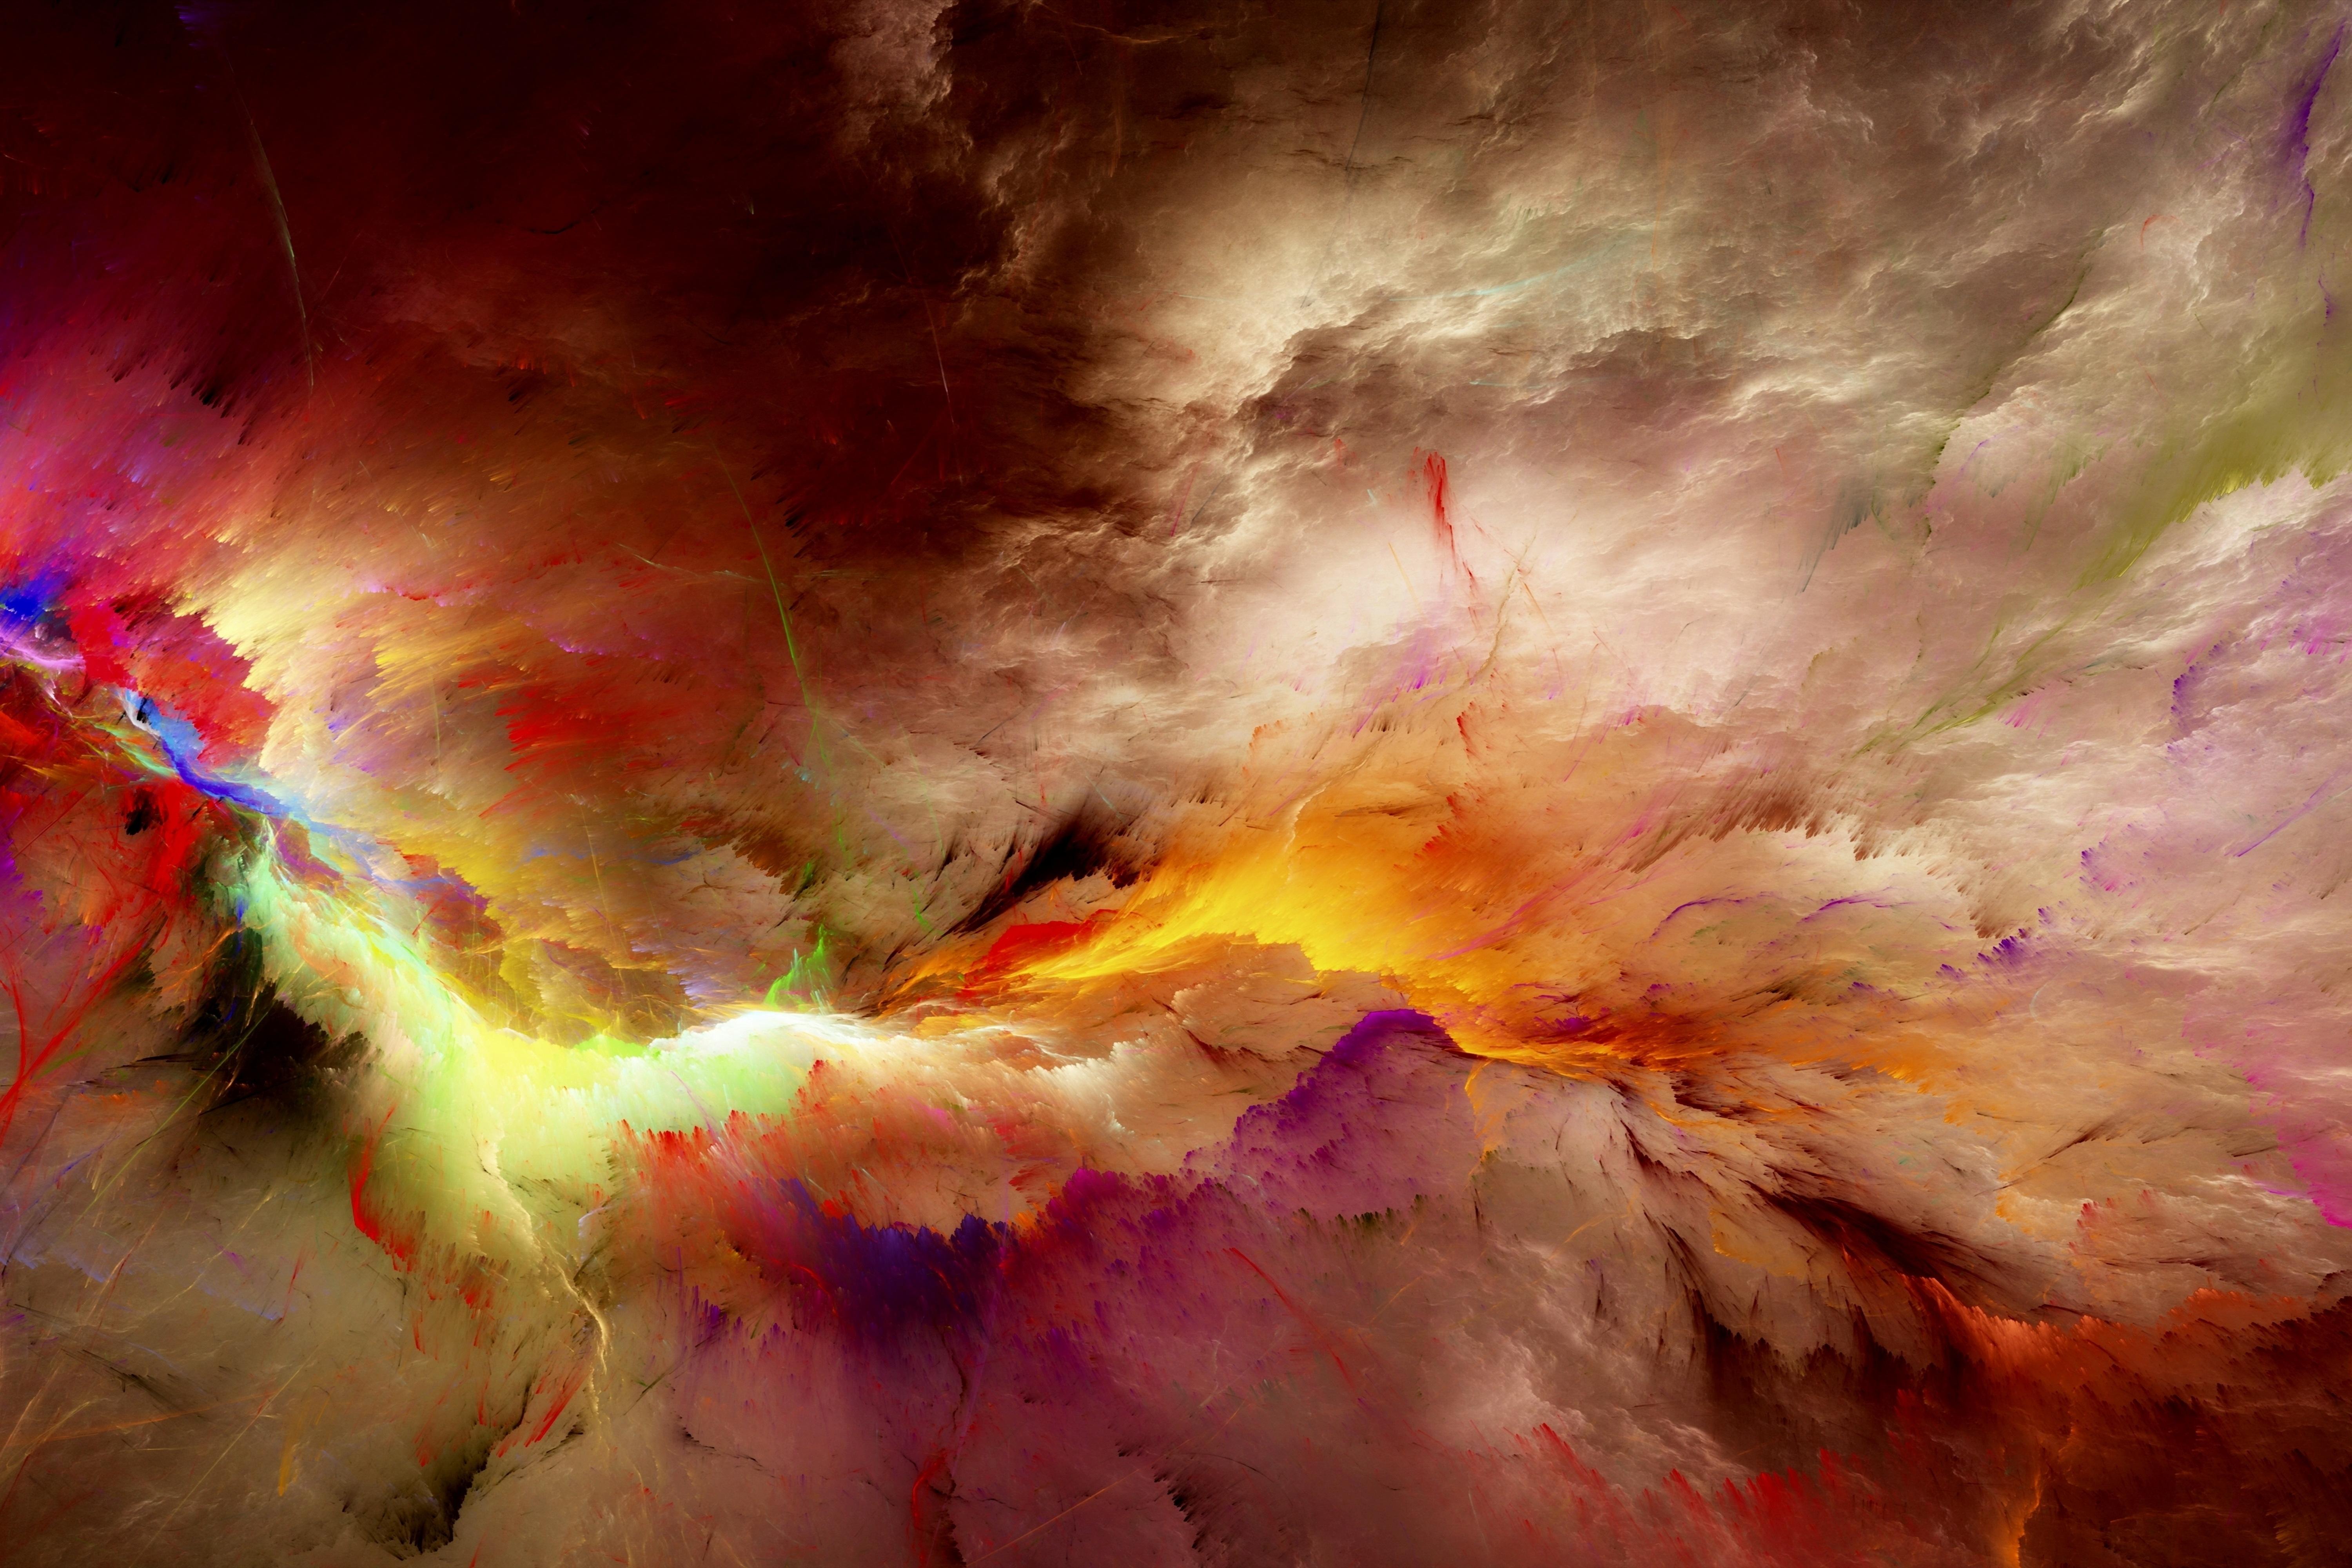 Colorful Cloud Abstract 5k Retina Ultra HD Wallpaper. Background